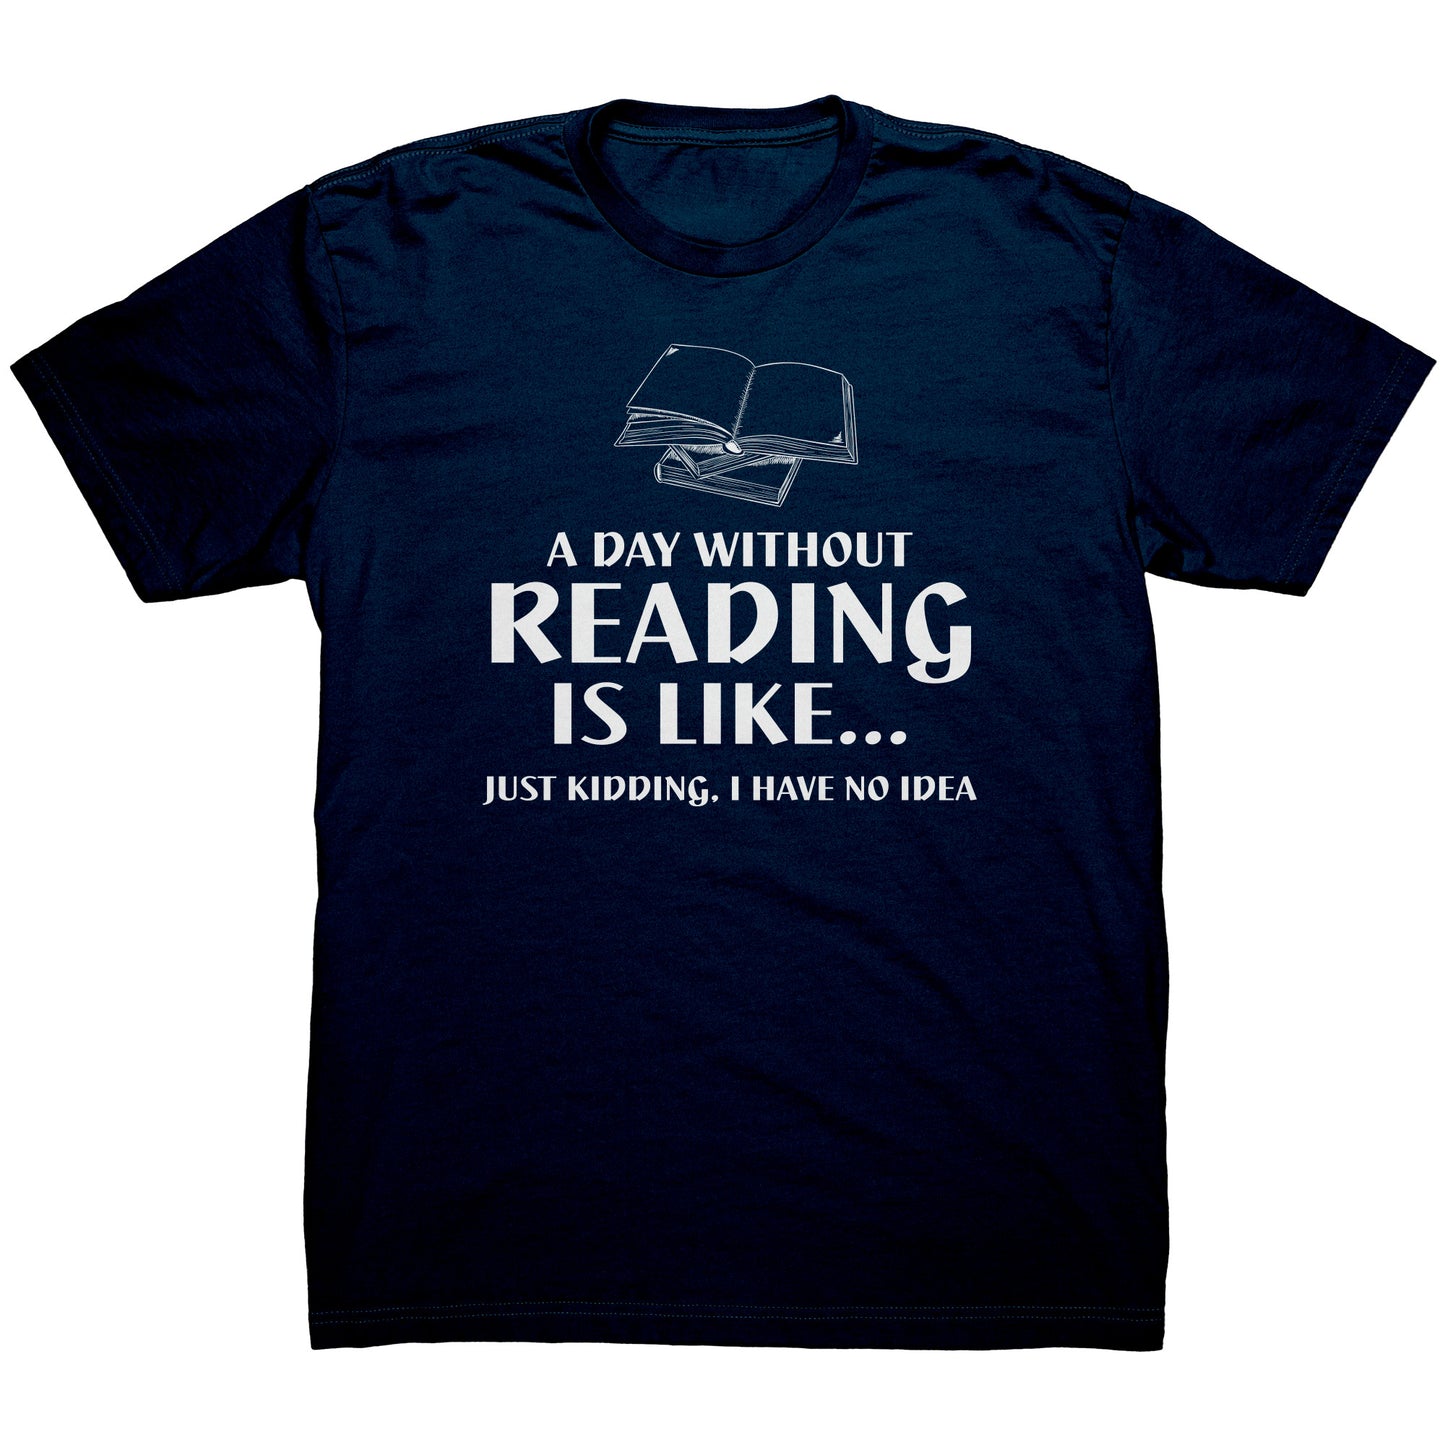 A Day Without Reading Is Like... Just Kidding, I Have No Idea | Men's T-Shirt